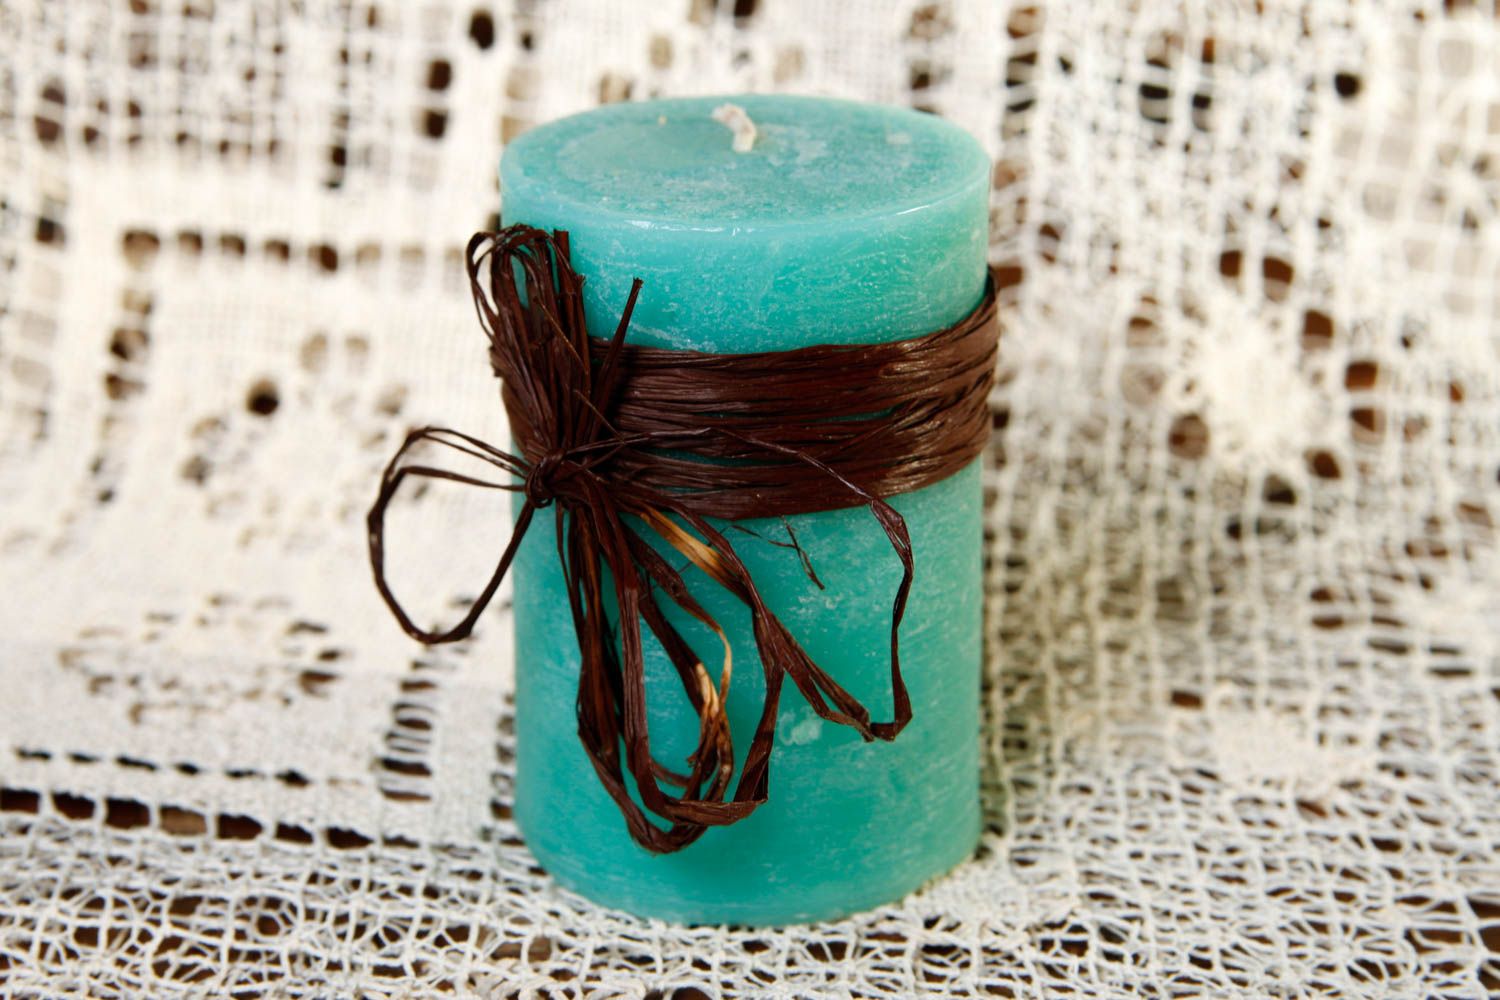 Unusual handmade paraffin candle designs cute candles housewarming gifts photo 1